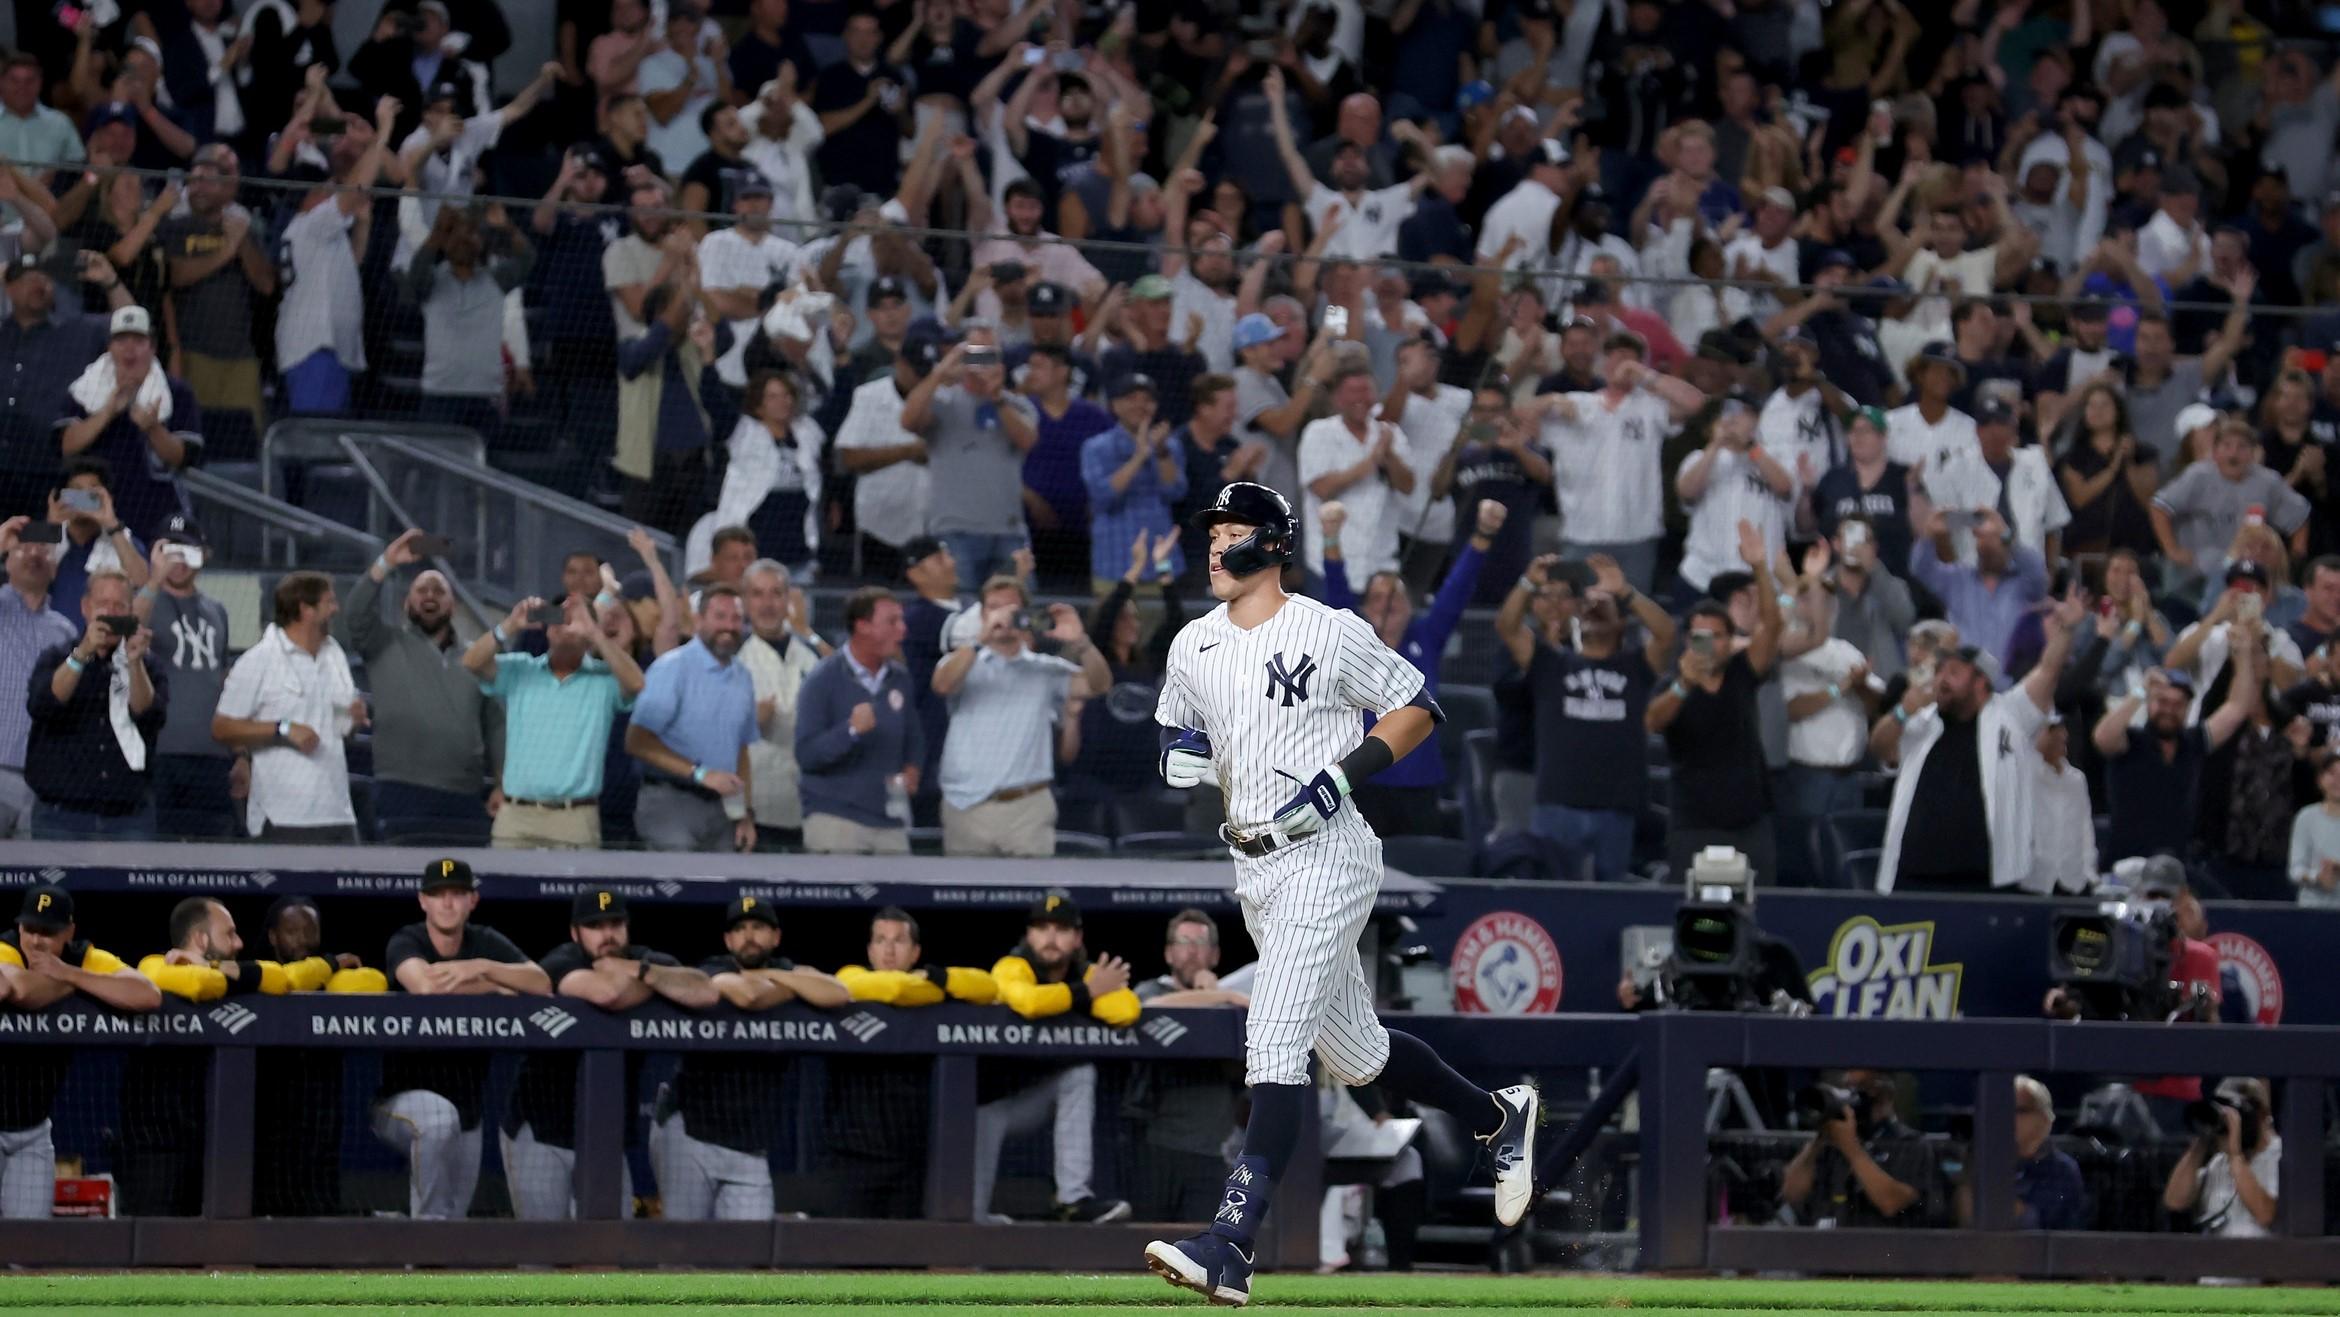 Yankees right fielder Aaron Judge (99) rounds the bases after hitting his 60th home run of the season during the ninth inning against the Pittsburgh Pirates at Yankee Stadium. / Brad Penner-USA TODAY Sports